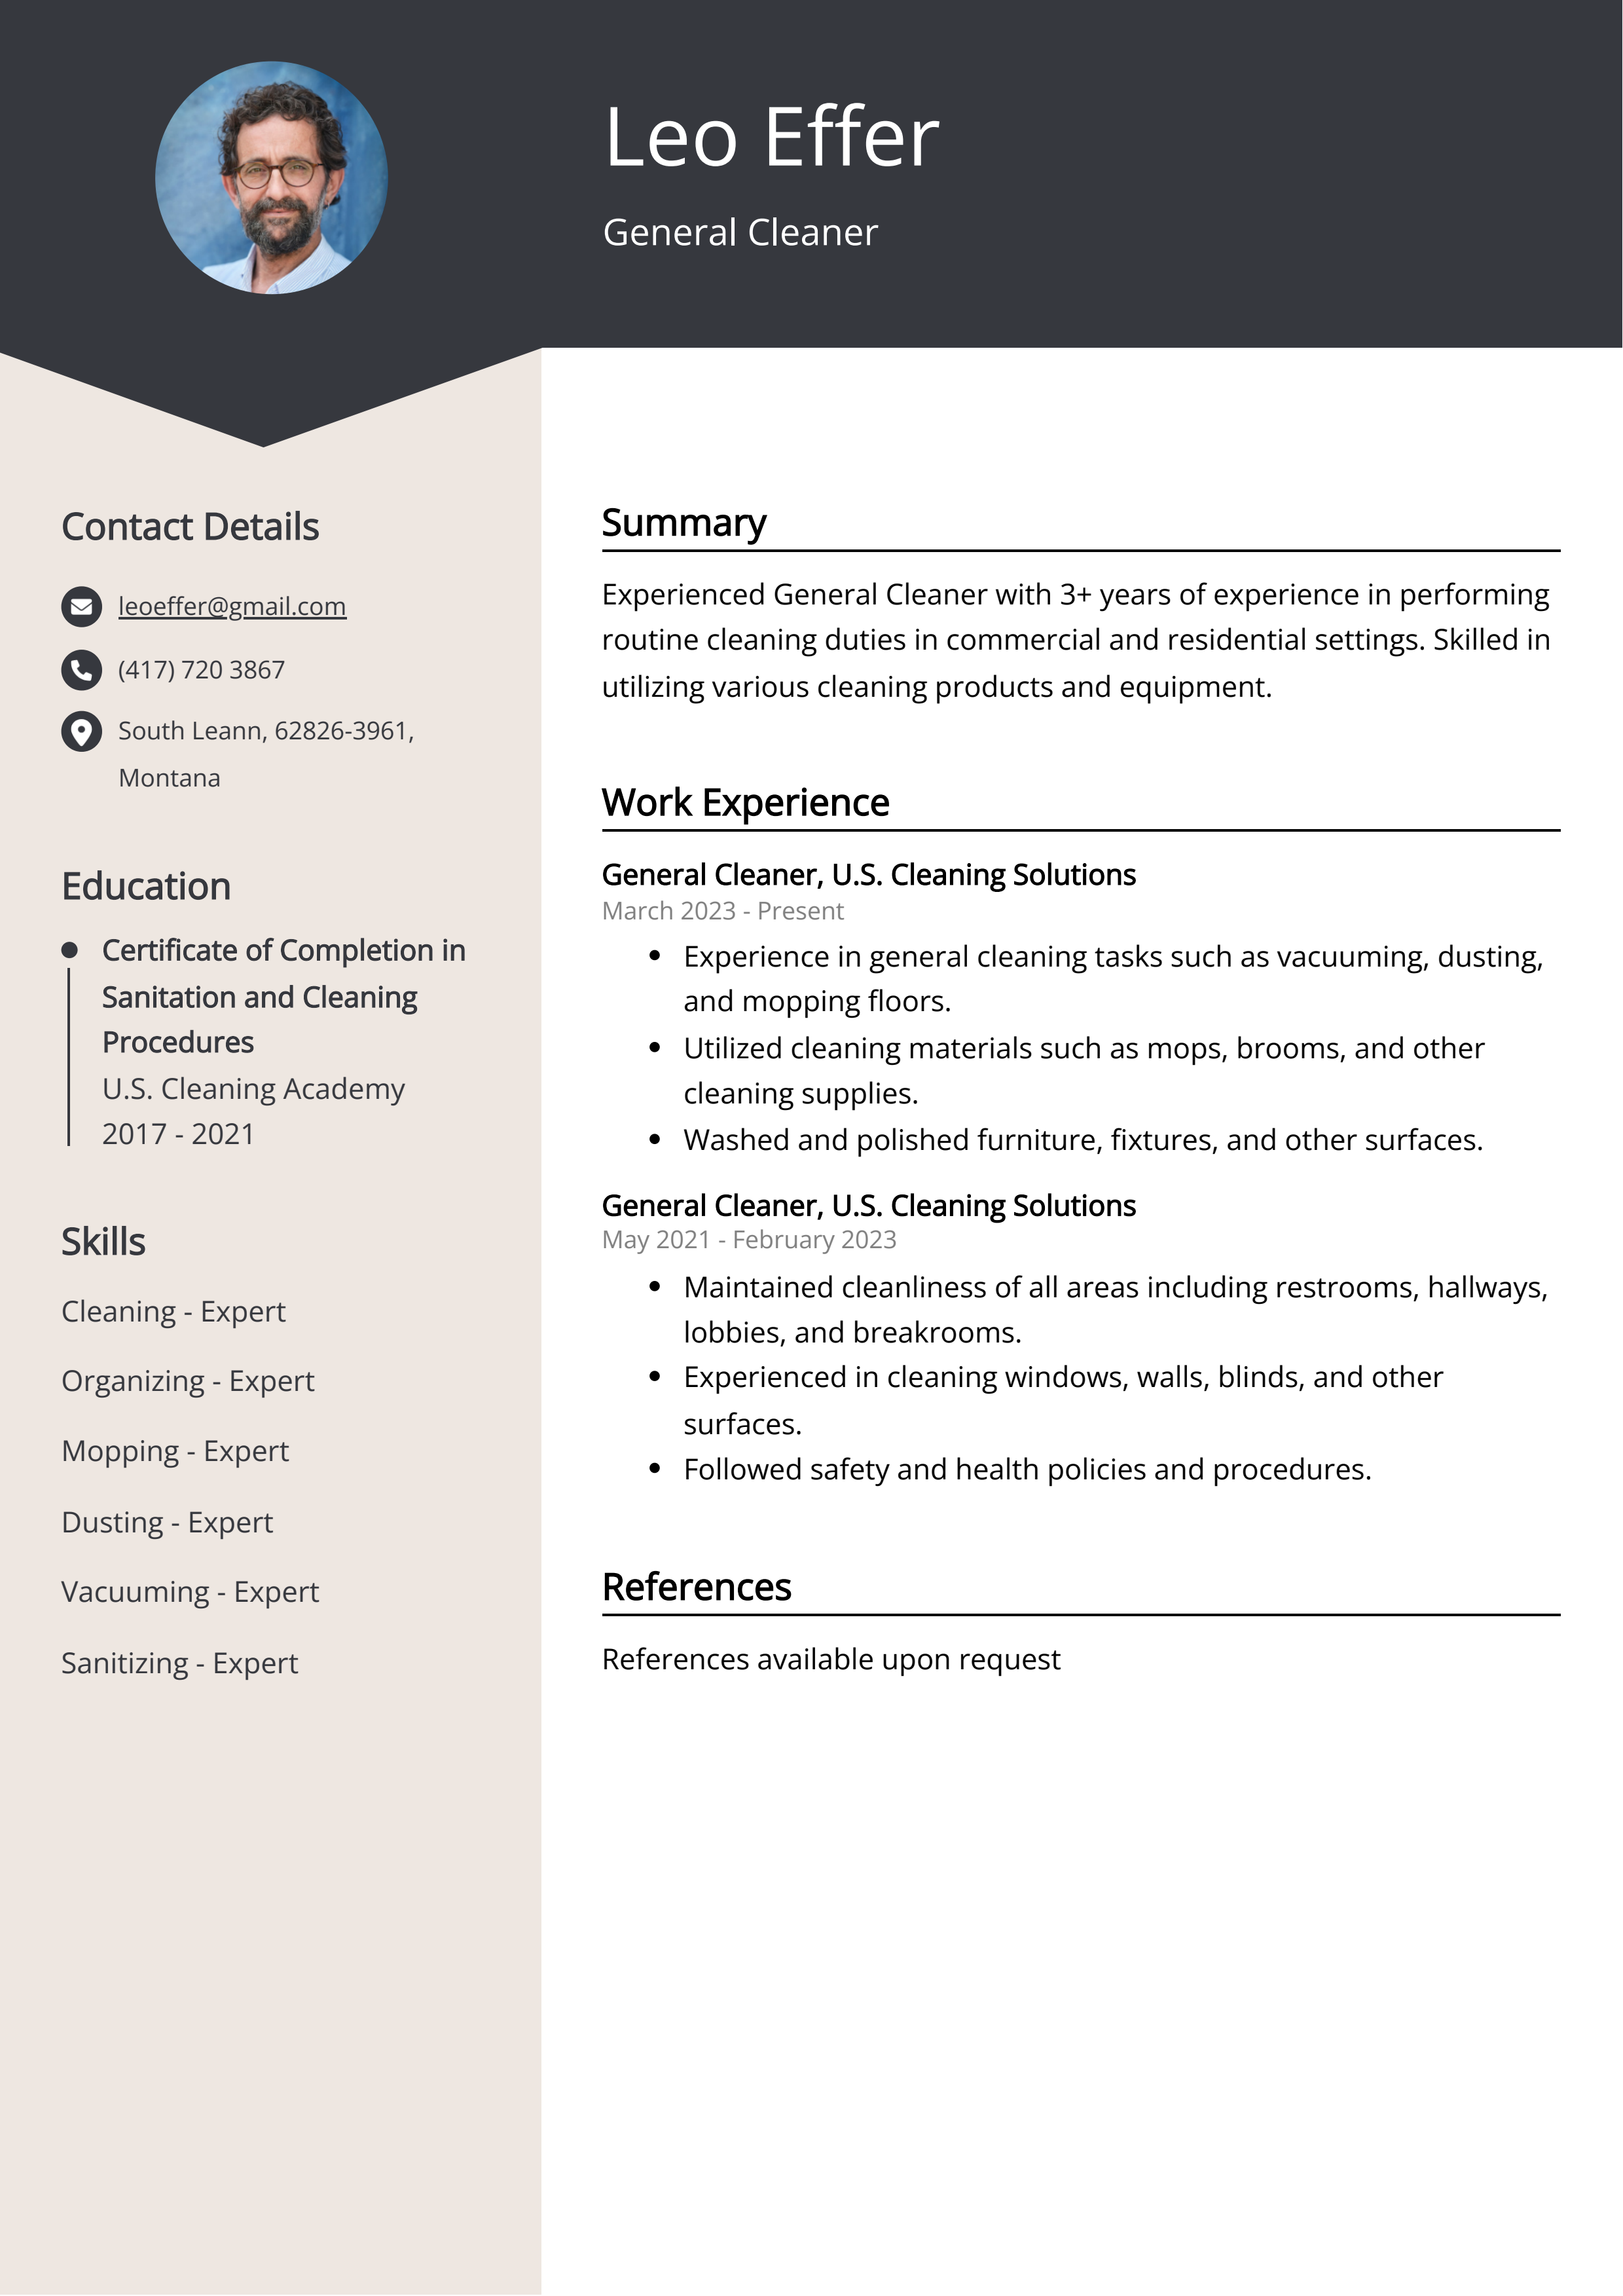 General Cleaner CV Example